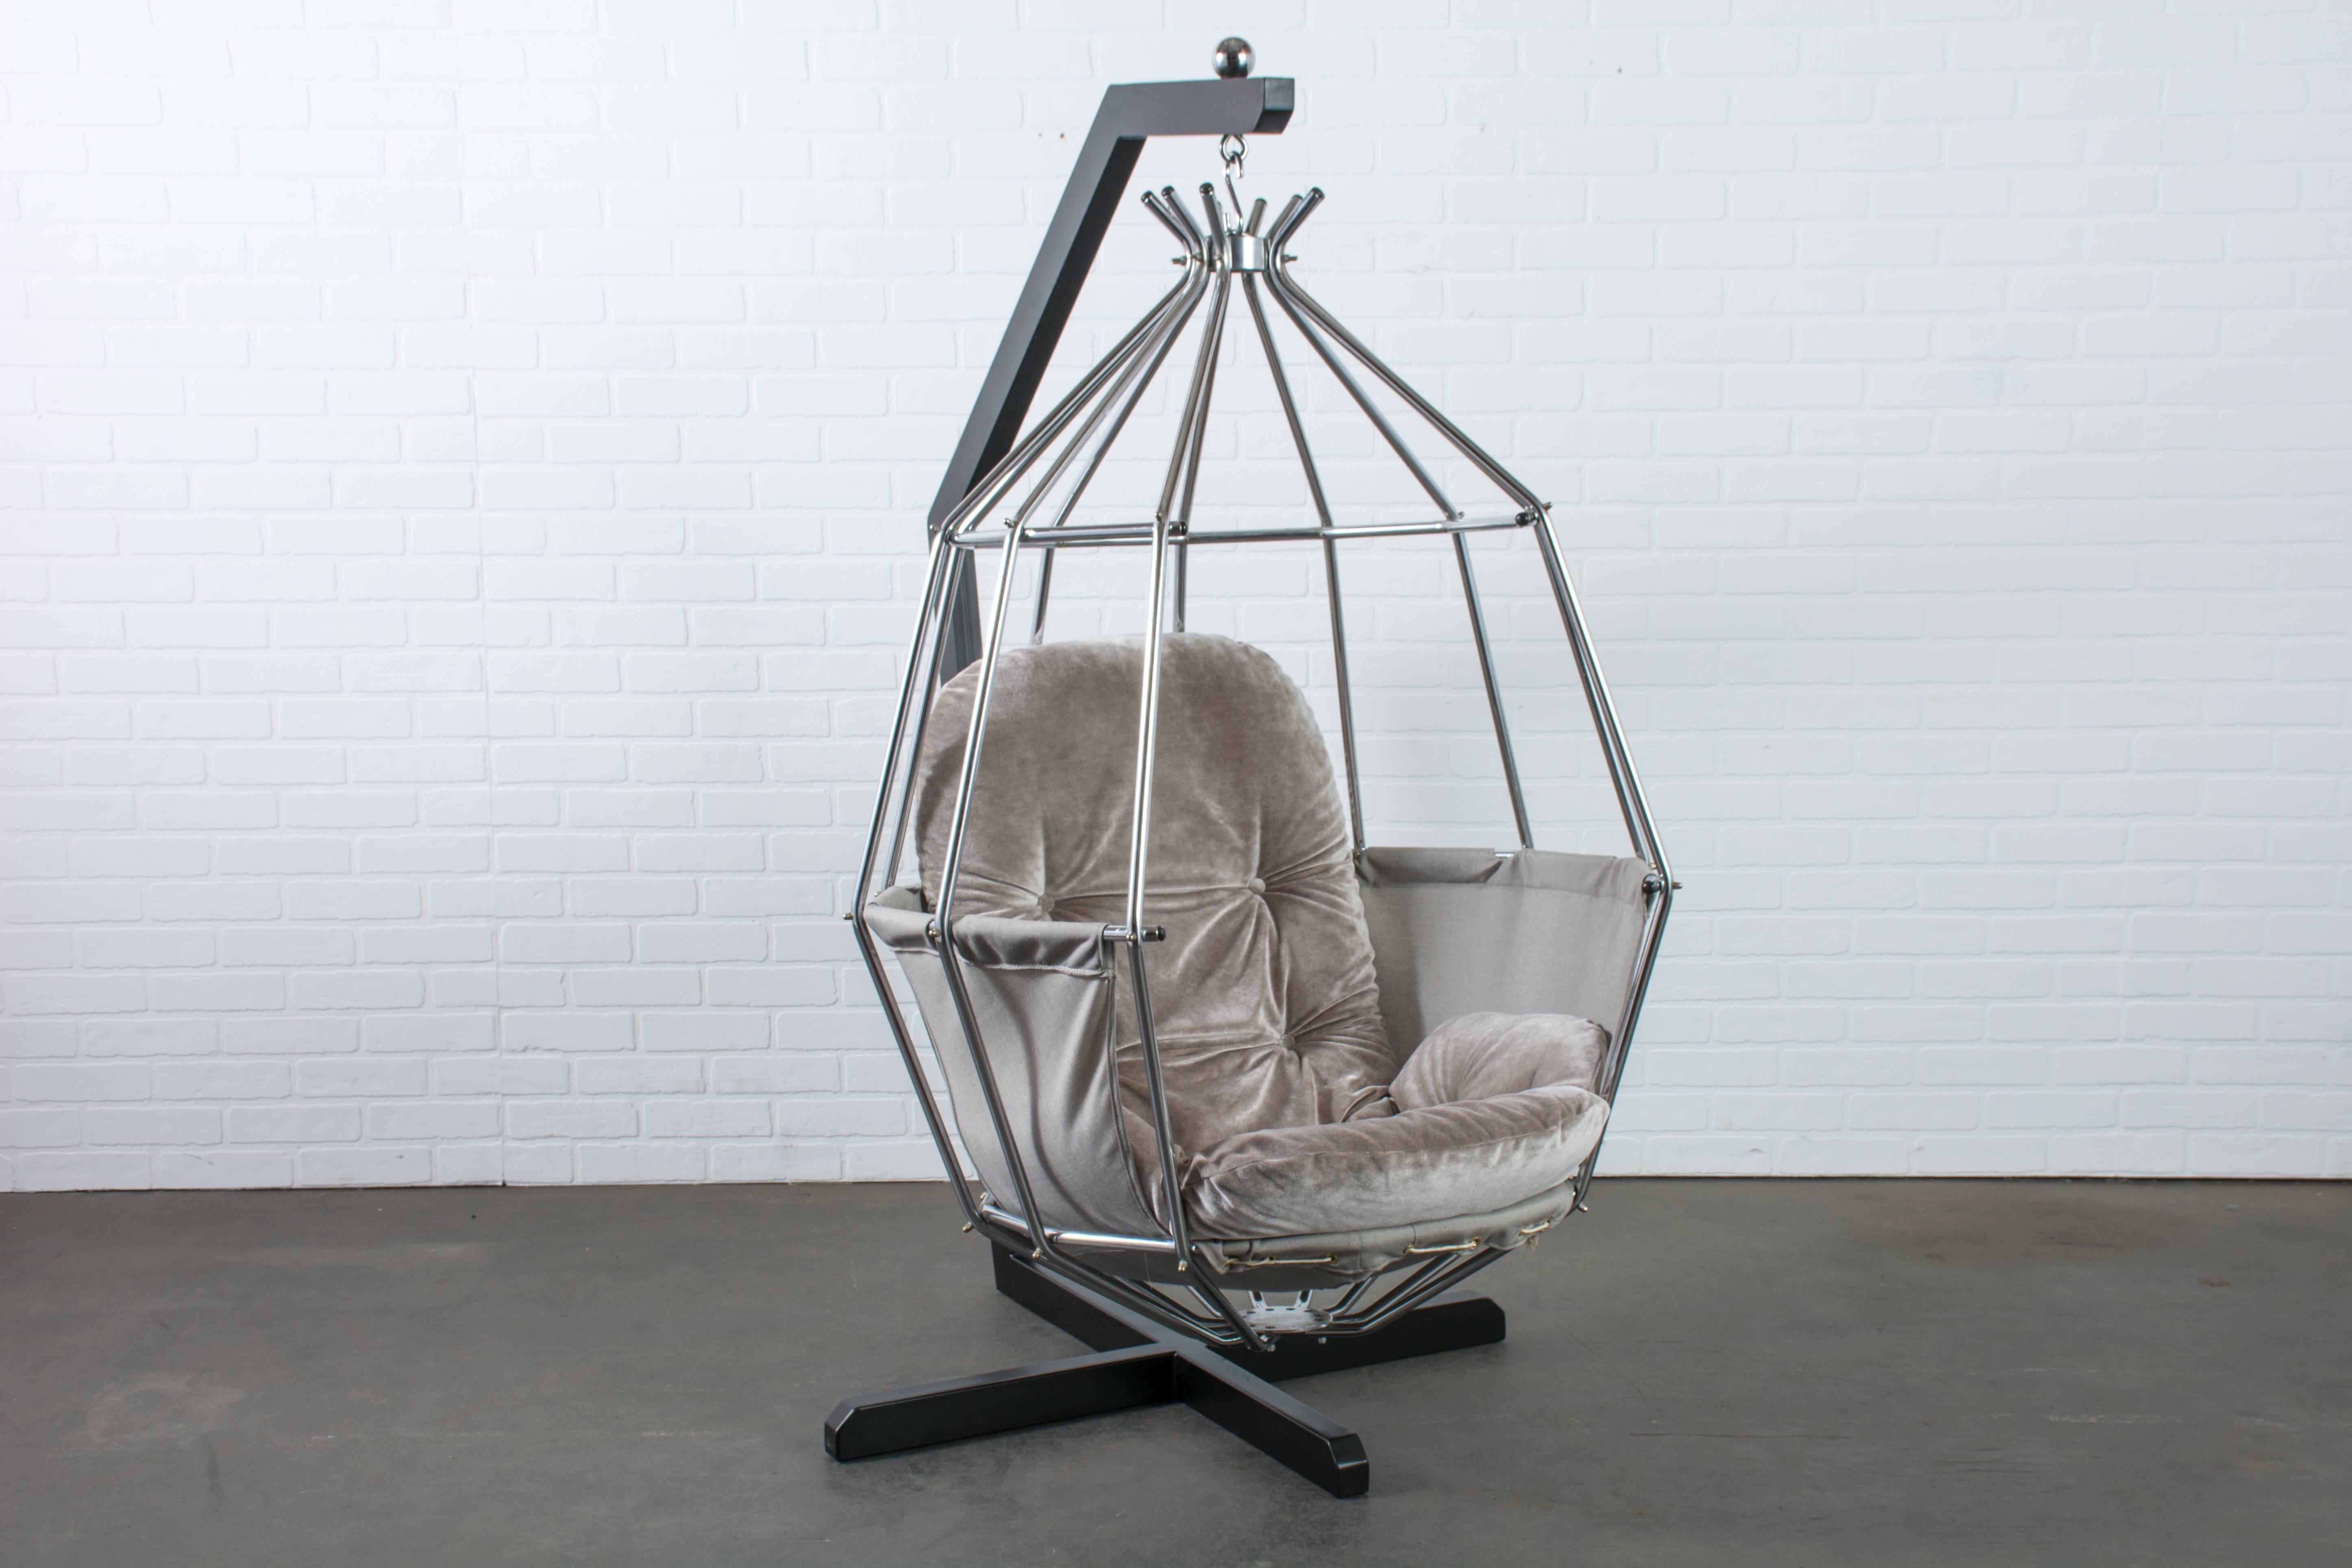 This vintage Mid-Century parrot chair was designed by Ib Arberg in the 1970s, Sweden.  It features a chrome bird cage chair that hangs from a steel angular stand with a black finish.  The original cushion has been professionally reupholstered in